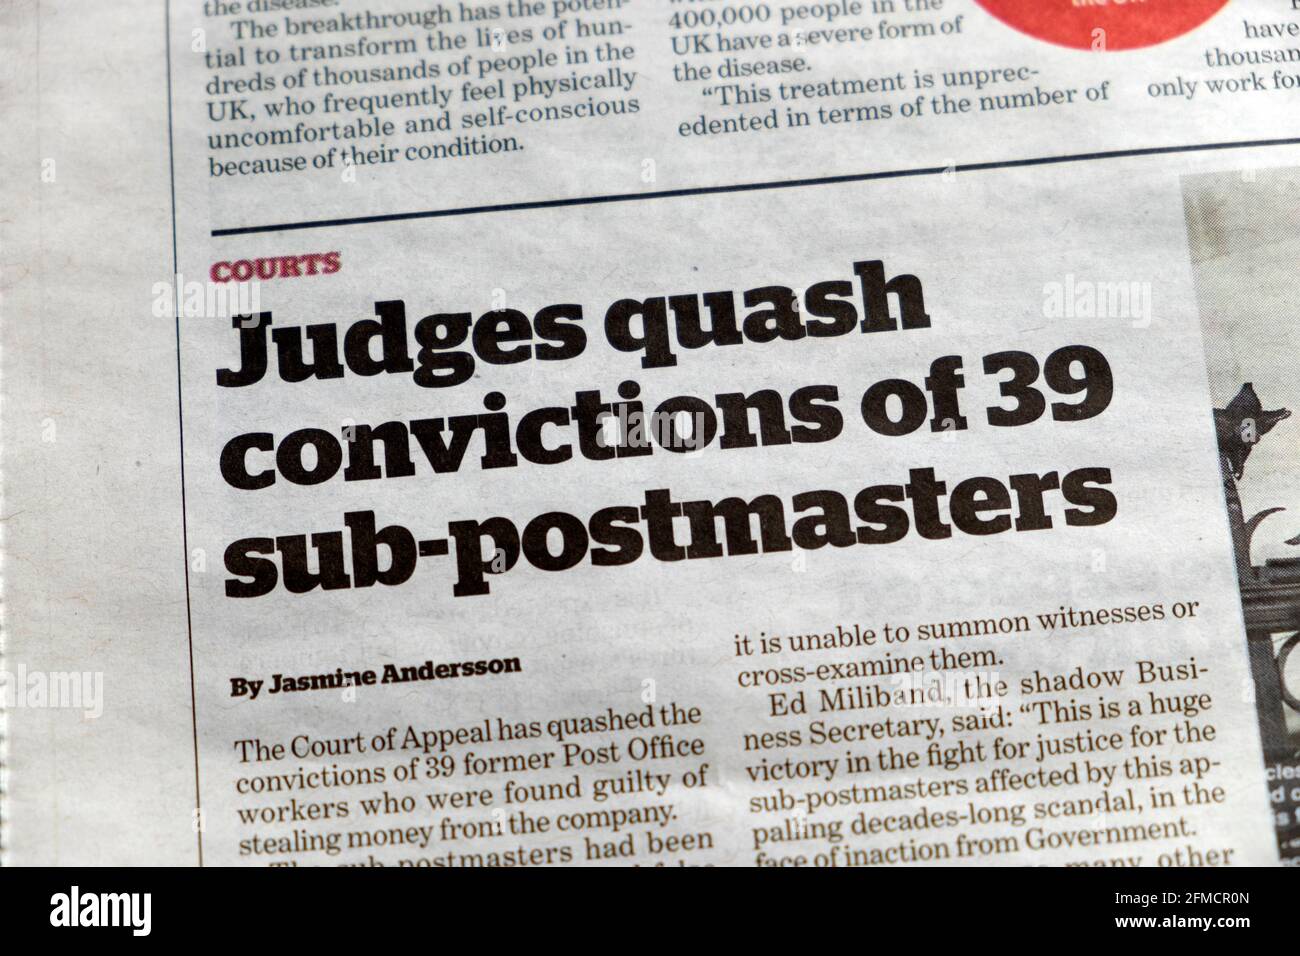 'Judges quash convictions of 39 sub-postmasters' post office scandal in for workers in i newspaper headline article London England UK 23 April 2021 Stock Photo